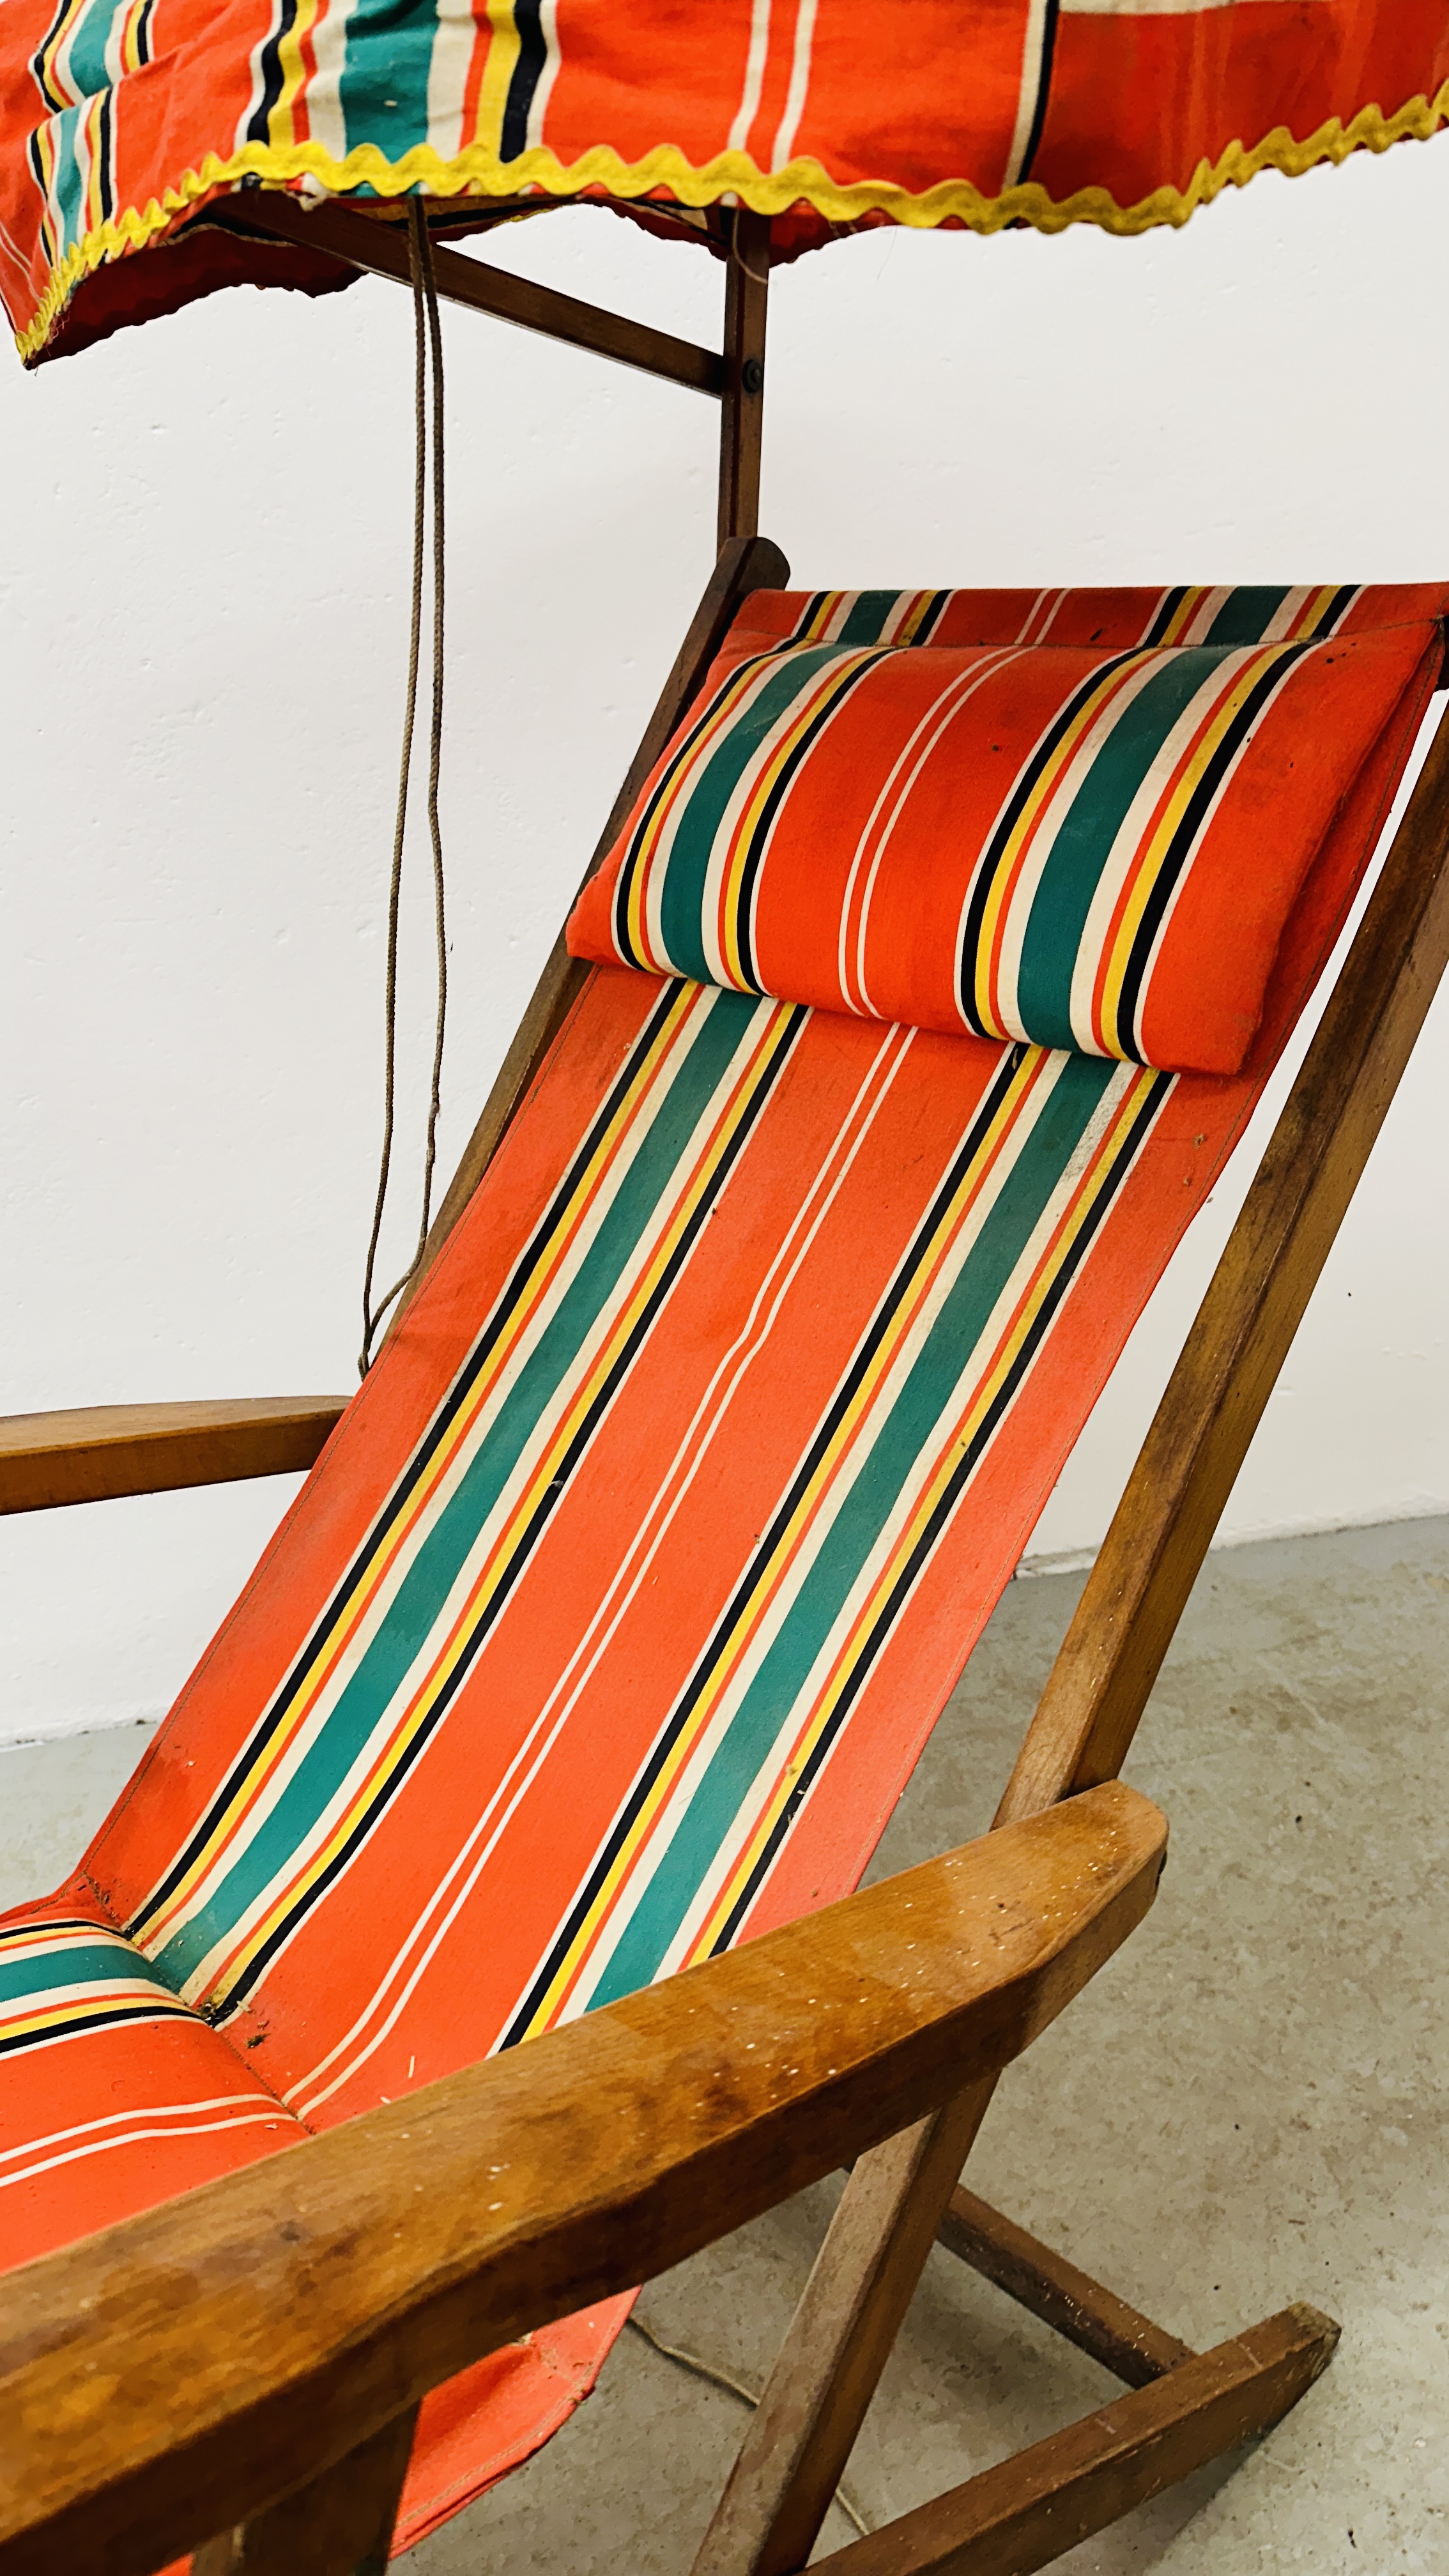 A PAIR OF GEEBRO "THE OCEAN CHAIR" DECK CHAIRS WITH SUN SHADES. - Image 5 of 13